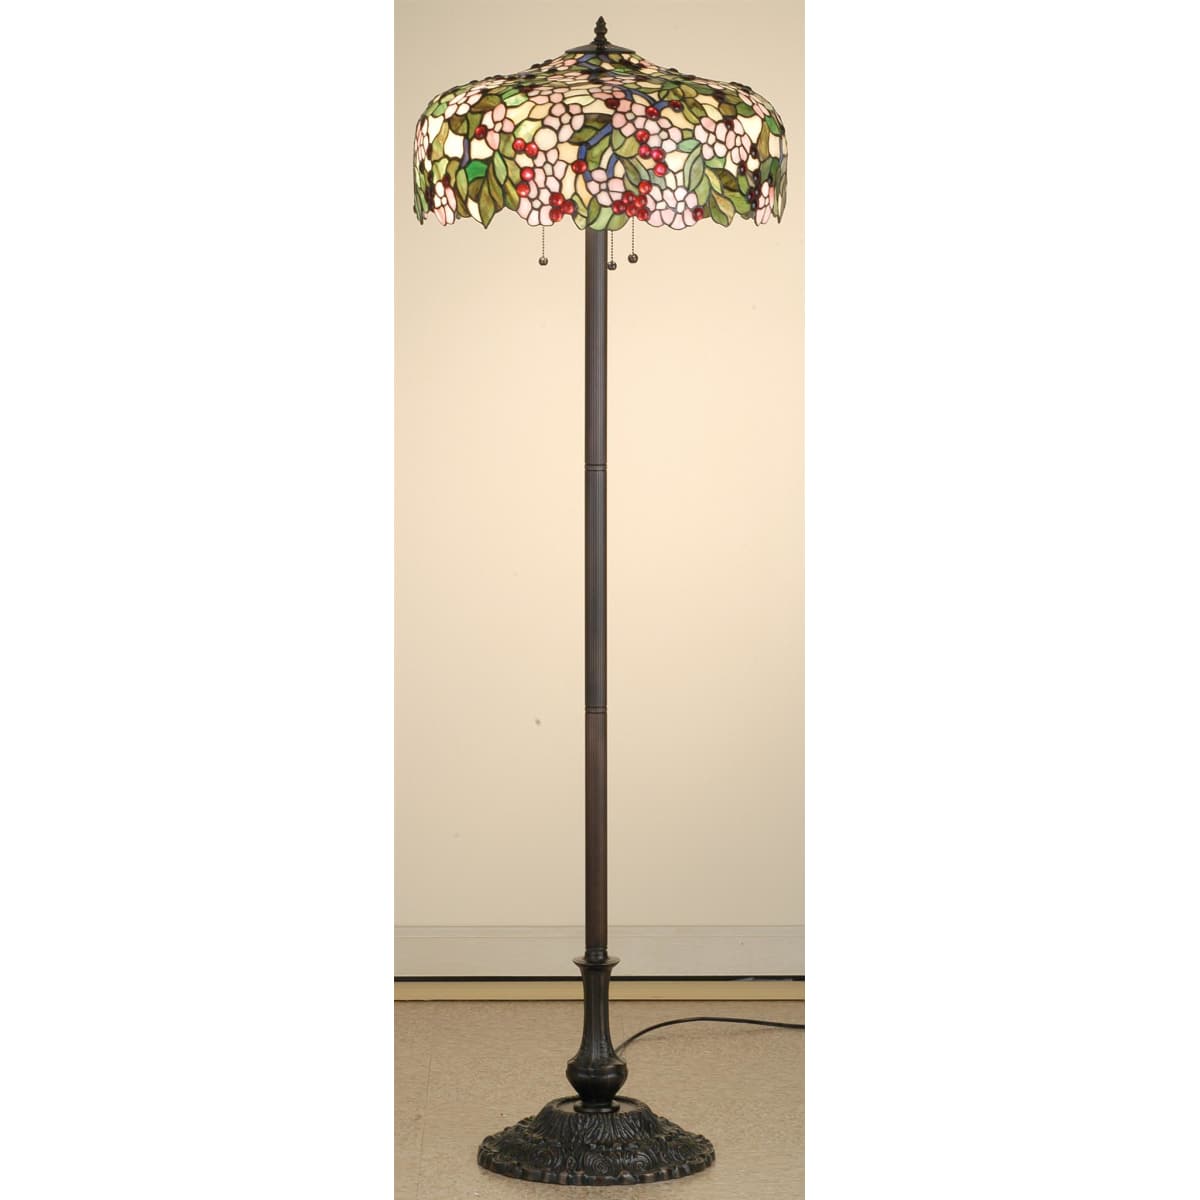 Meyda Tiffany 66466 Tiffany Glass Stained Glass / Tiffany Floor Lamp from  the Cherry Blossom Collection - LightingDirect.com